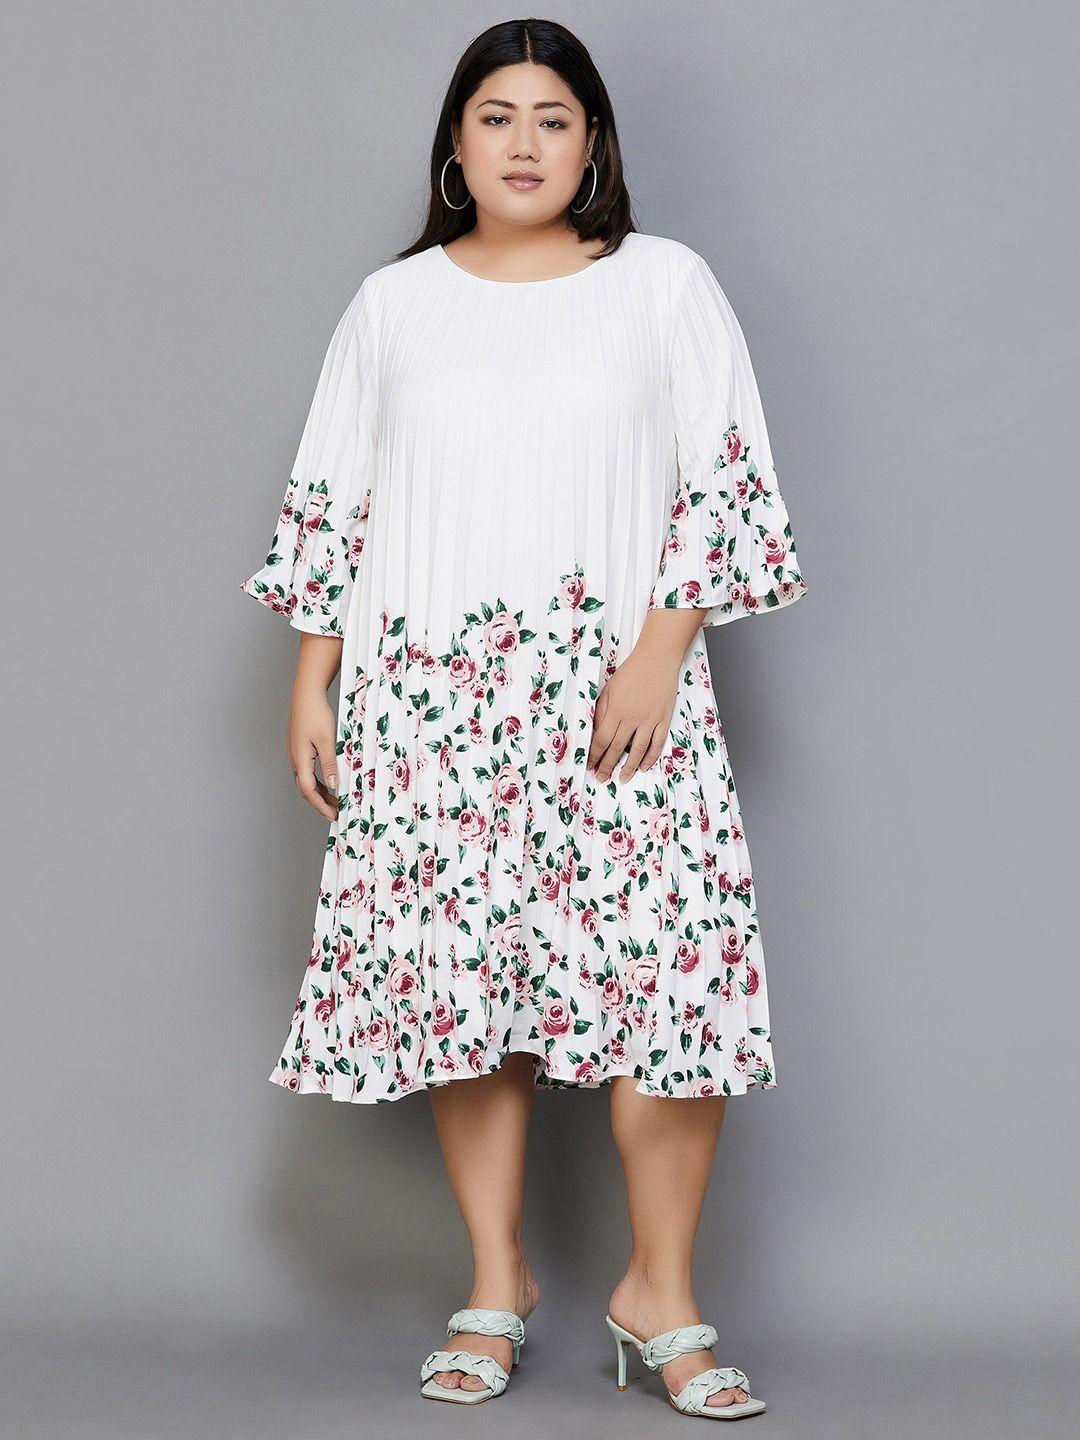 nexus by lifestyle plus size floral printed flared sleeve a-line dress